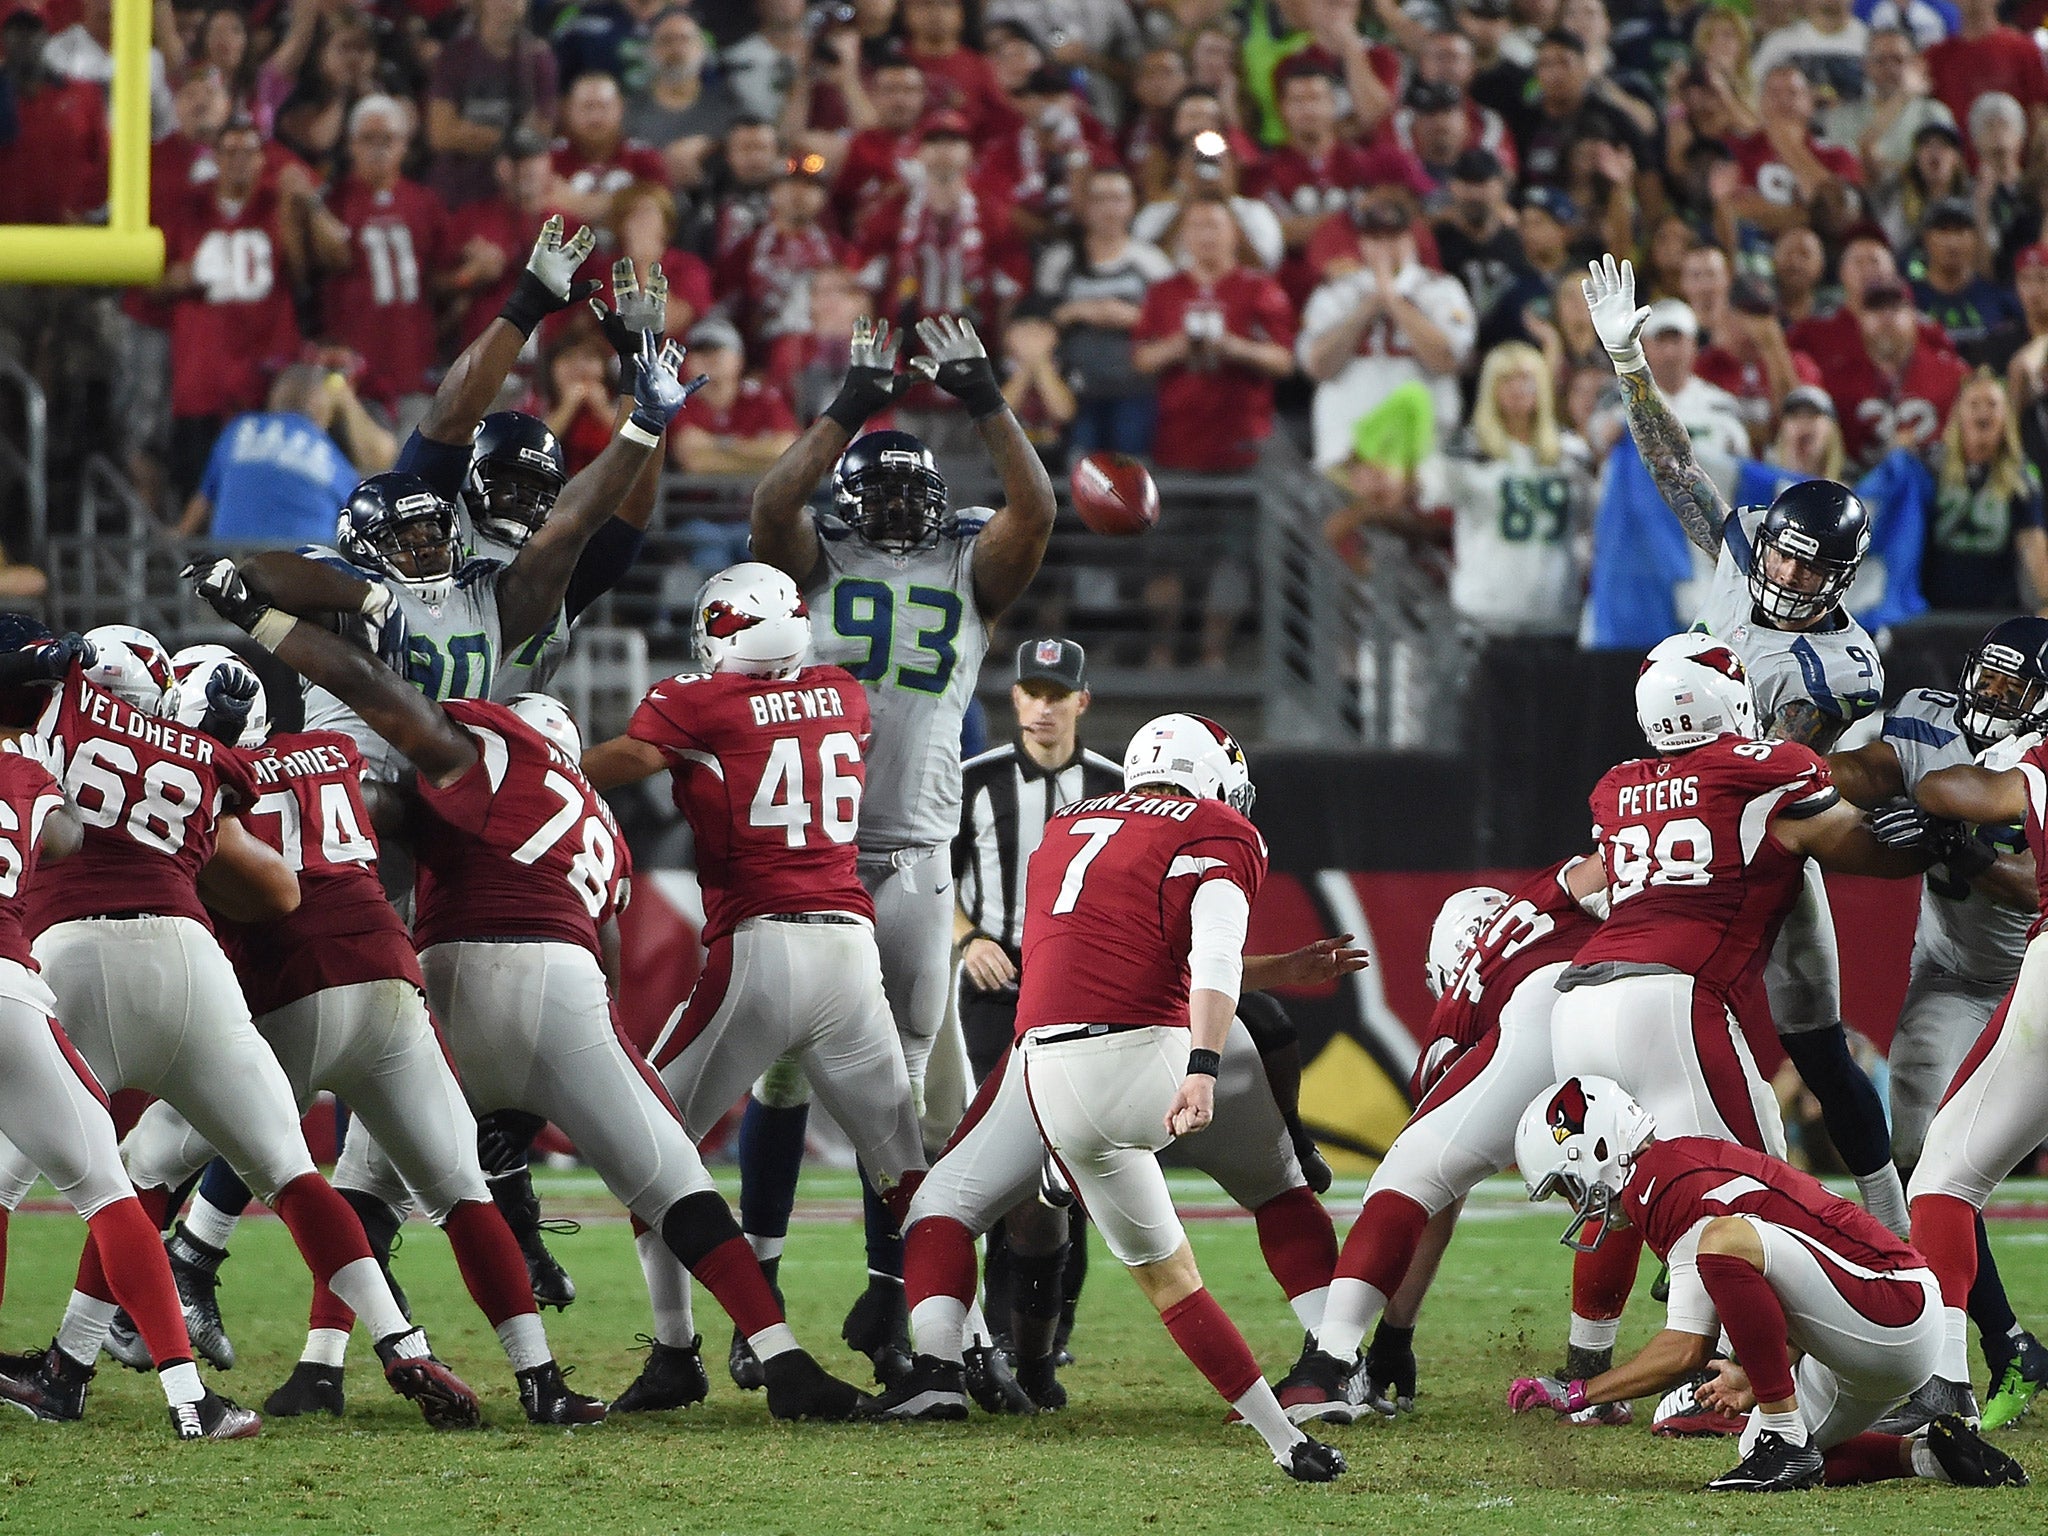 Chandler Catanzaro's overtime field goal struck the upright in the 6-6 draw with Arizona Cardinals